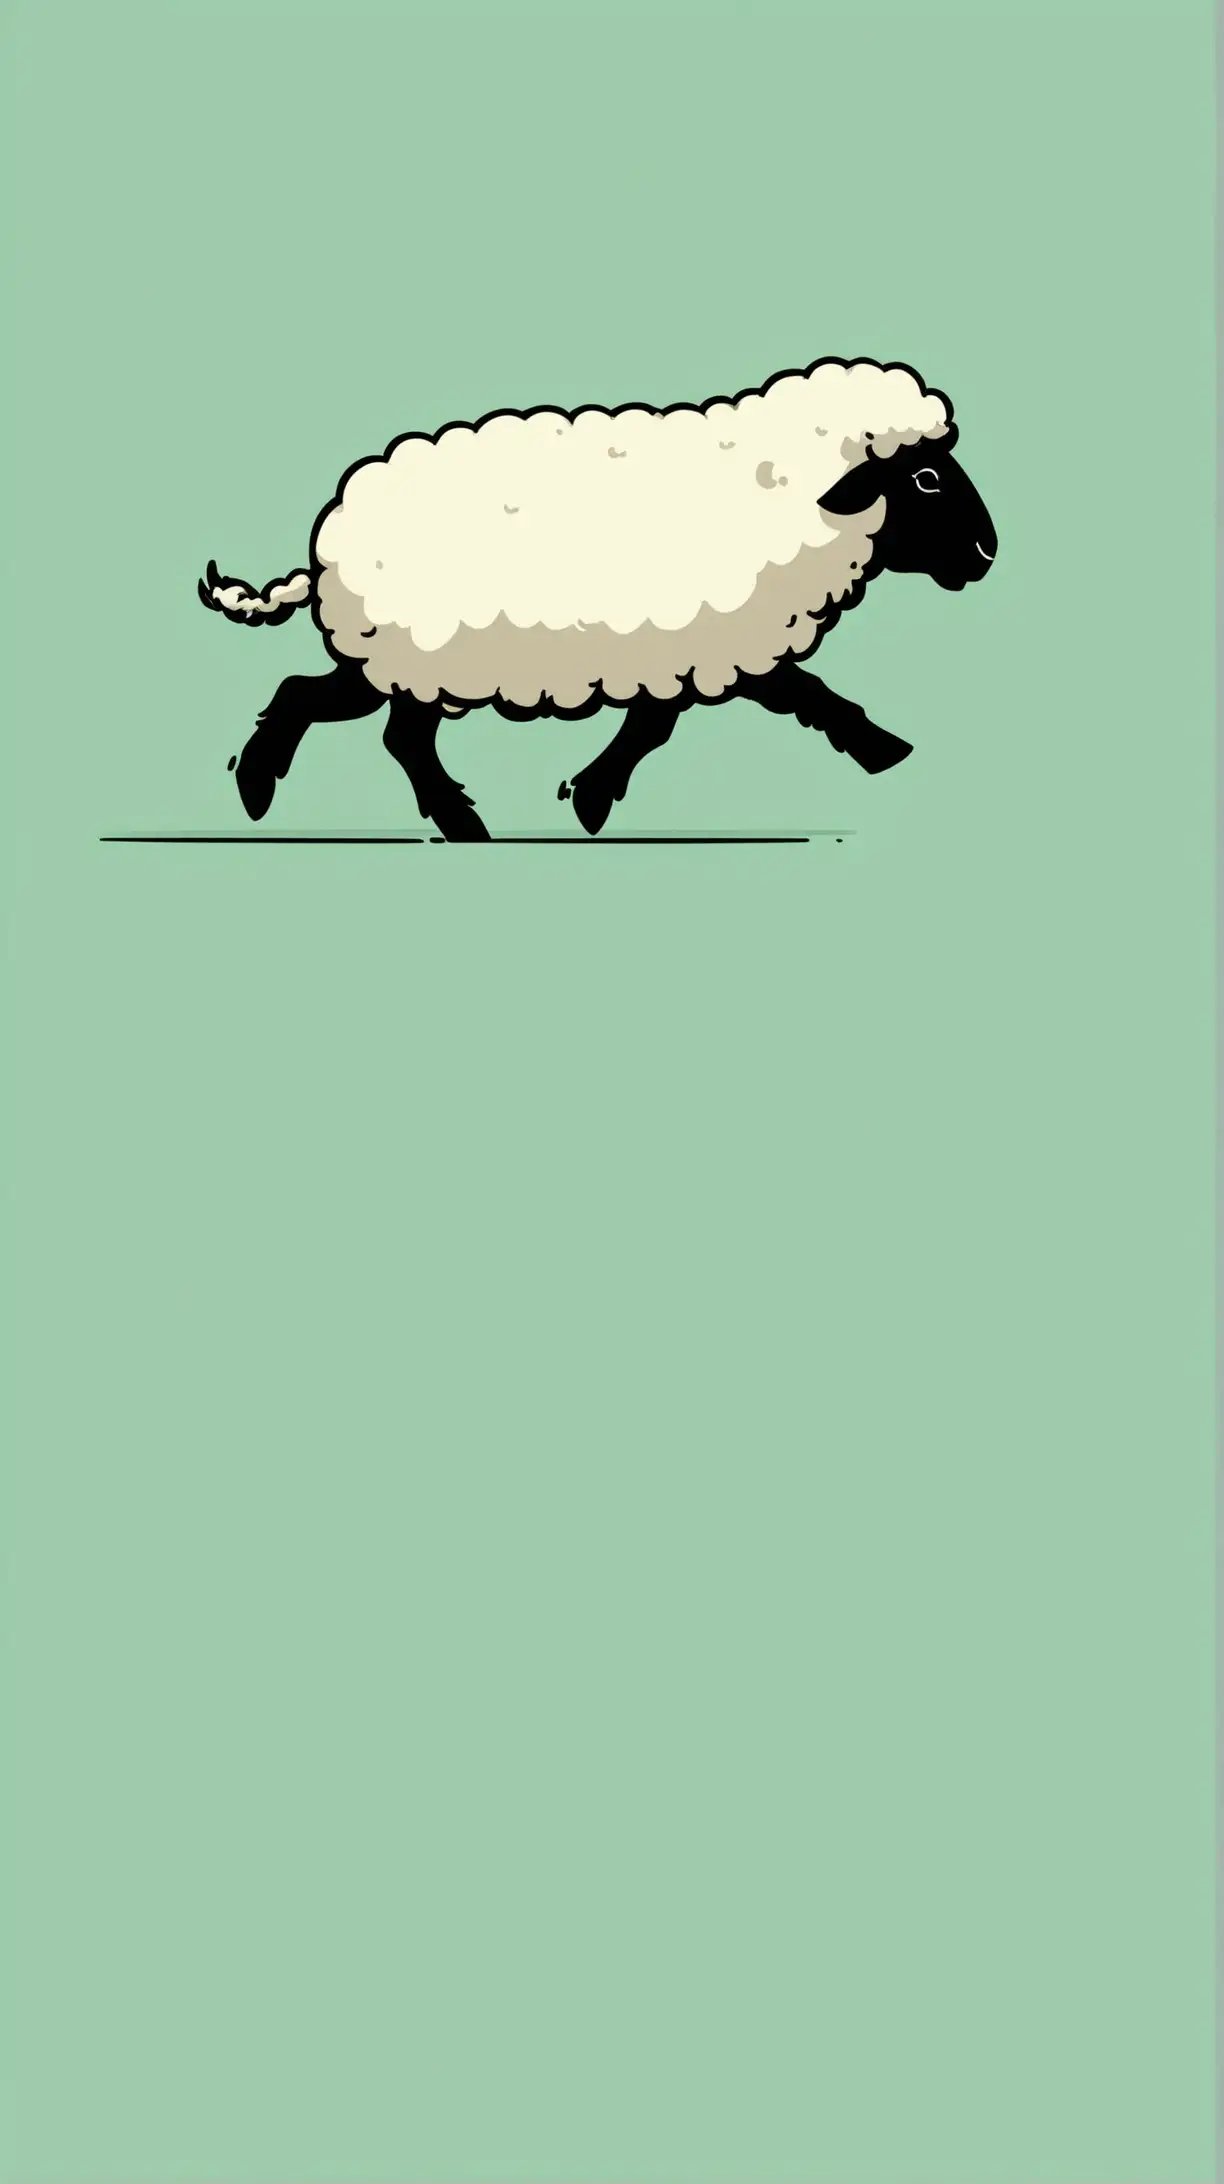 Comic book style.   Profile of a sheep walking.  Simple background